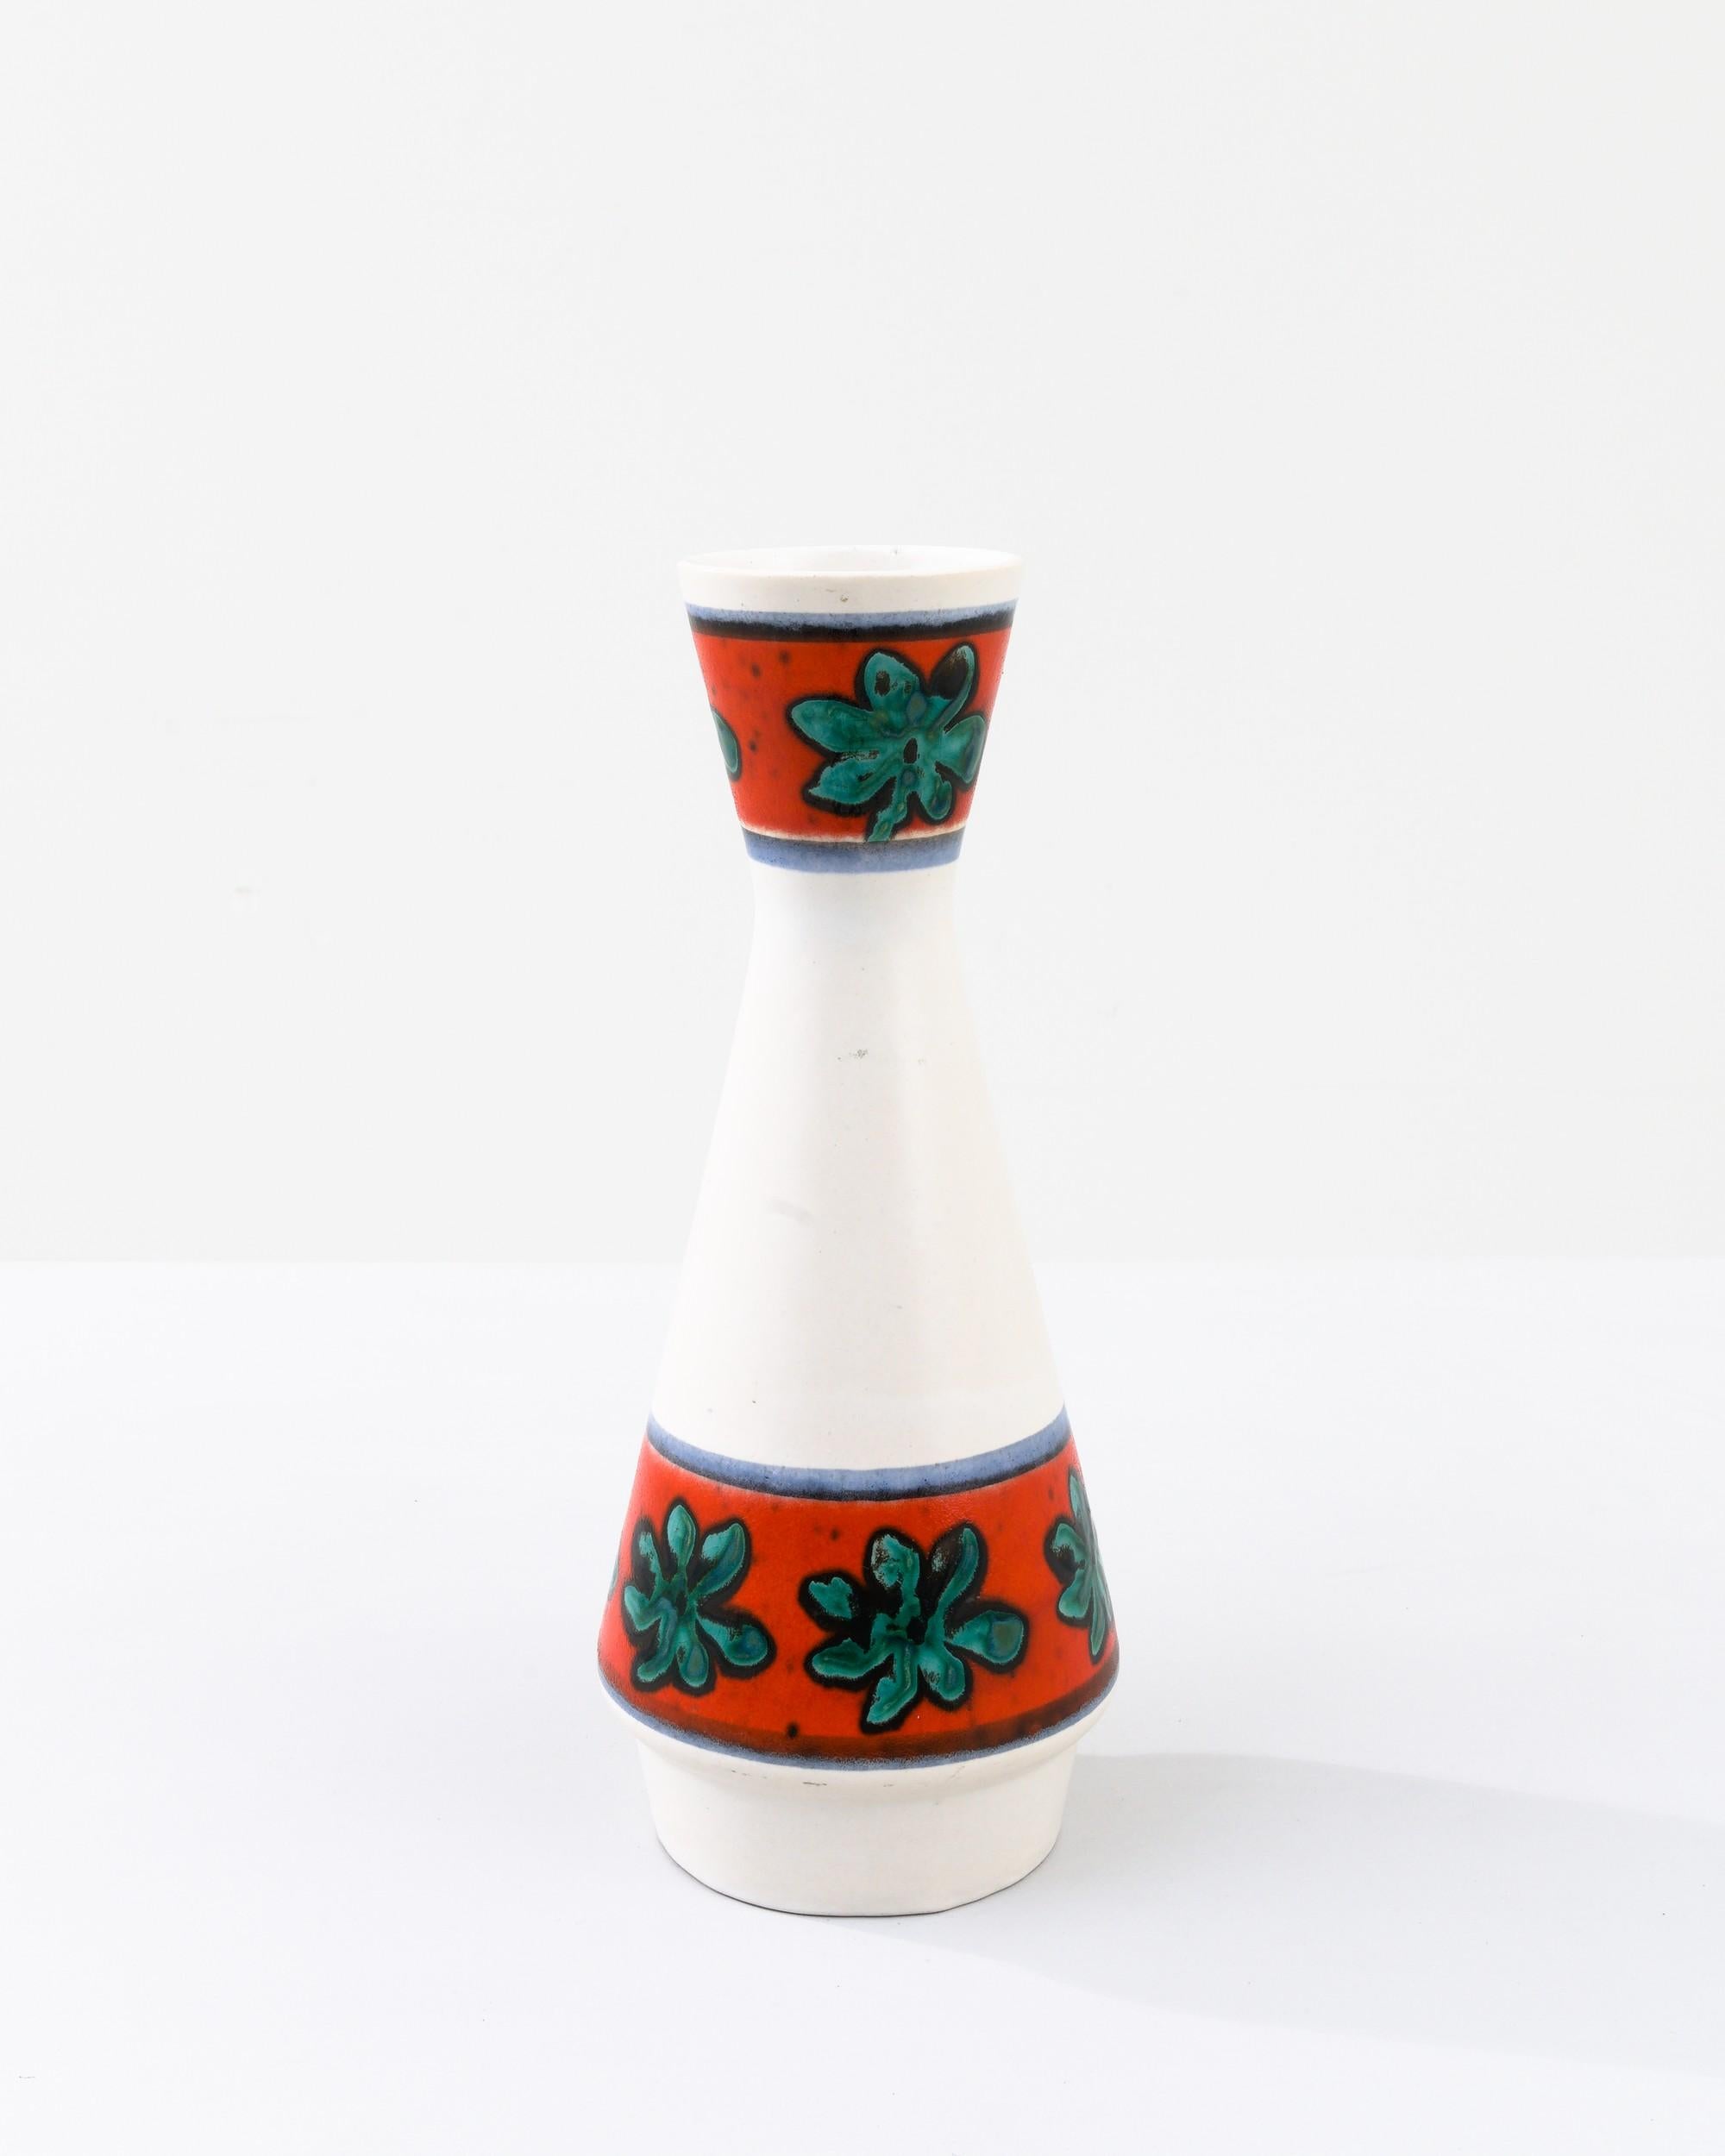 A ceramic vase from mid-20th century Germany. Neither large nor small, this studio made pot reflects the hand-held, and the handmade; the tactility of process and the artist's vision– realized on the potter’s wheel. Painted with a delicate touch,